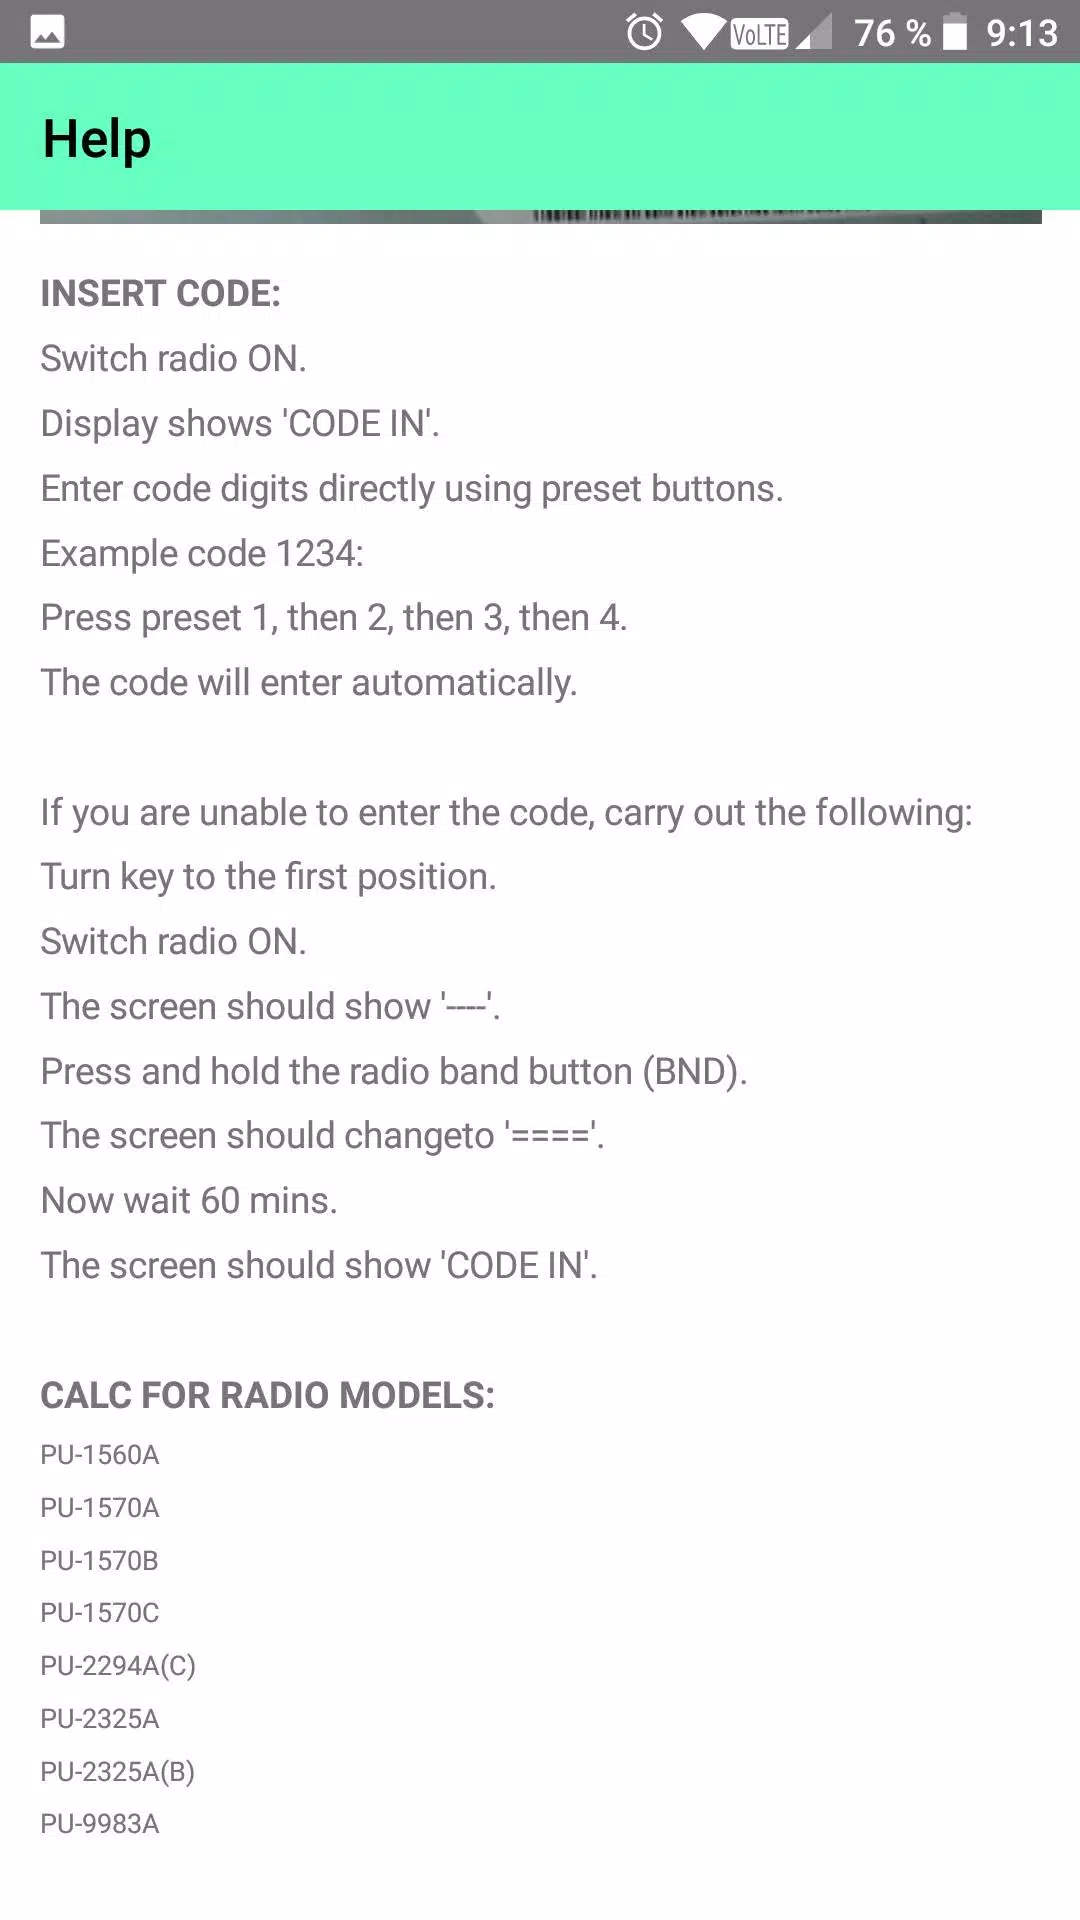 RADIO CODE for CLARION PU-2294 Latest Version 3.0.2 for Android